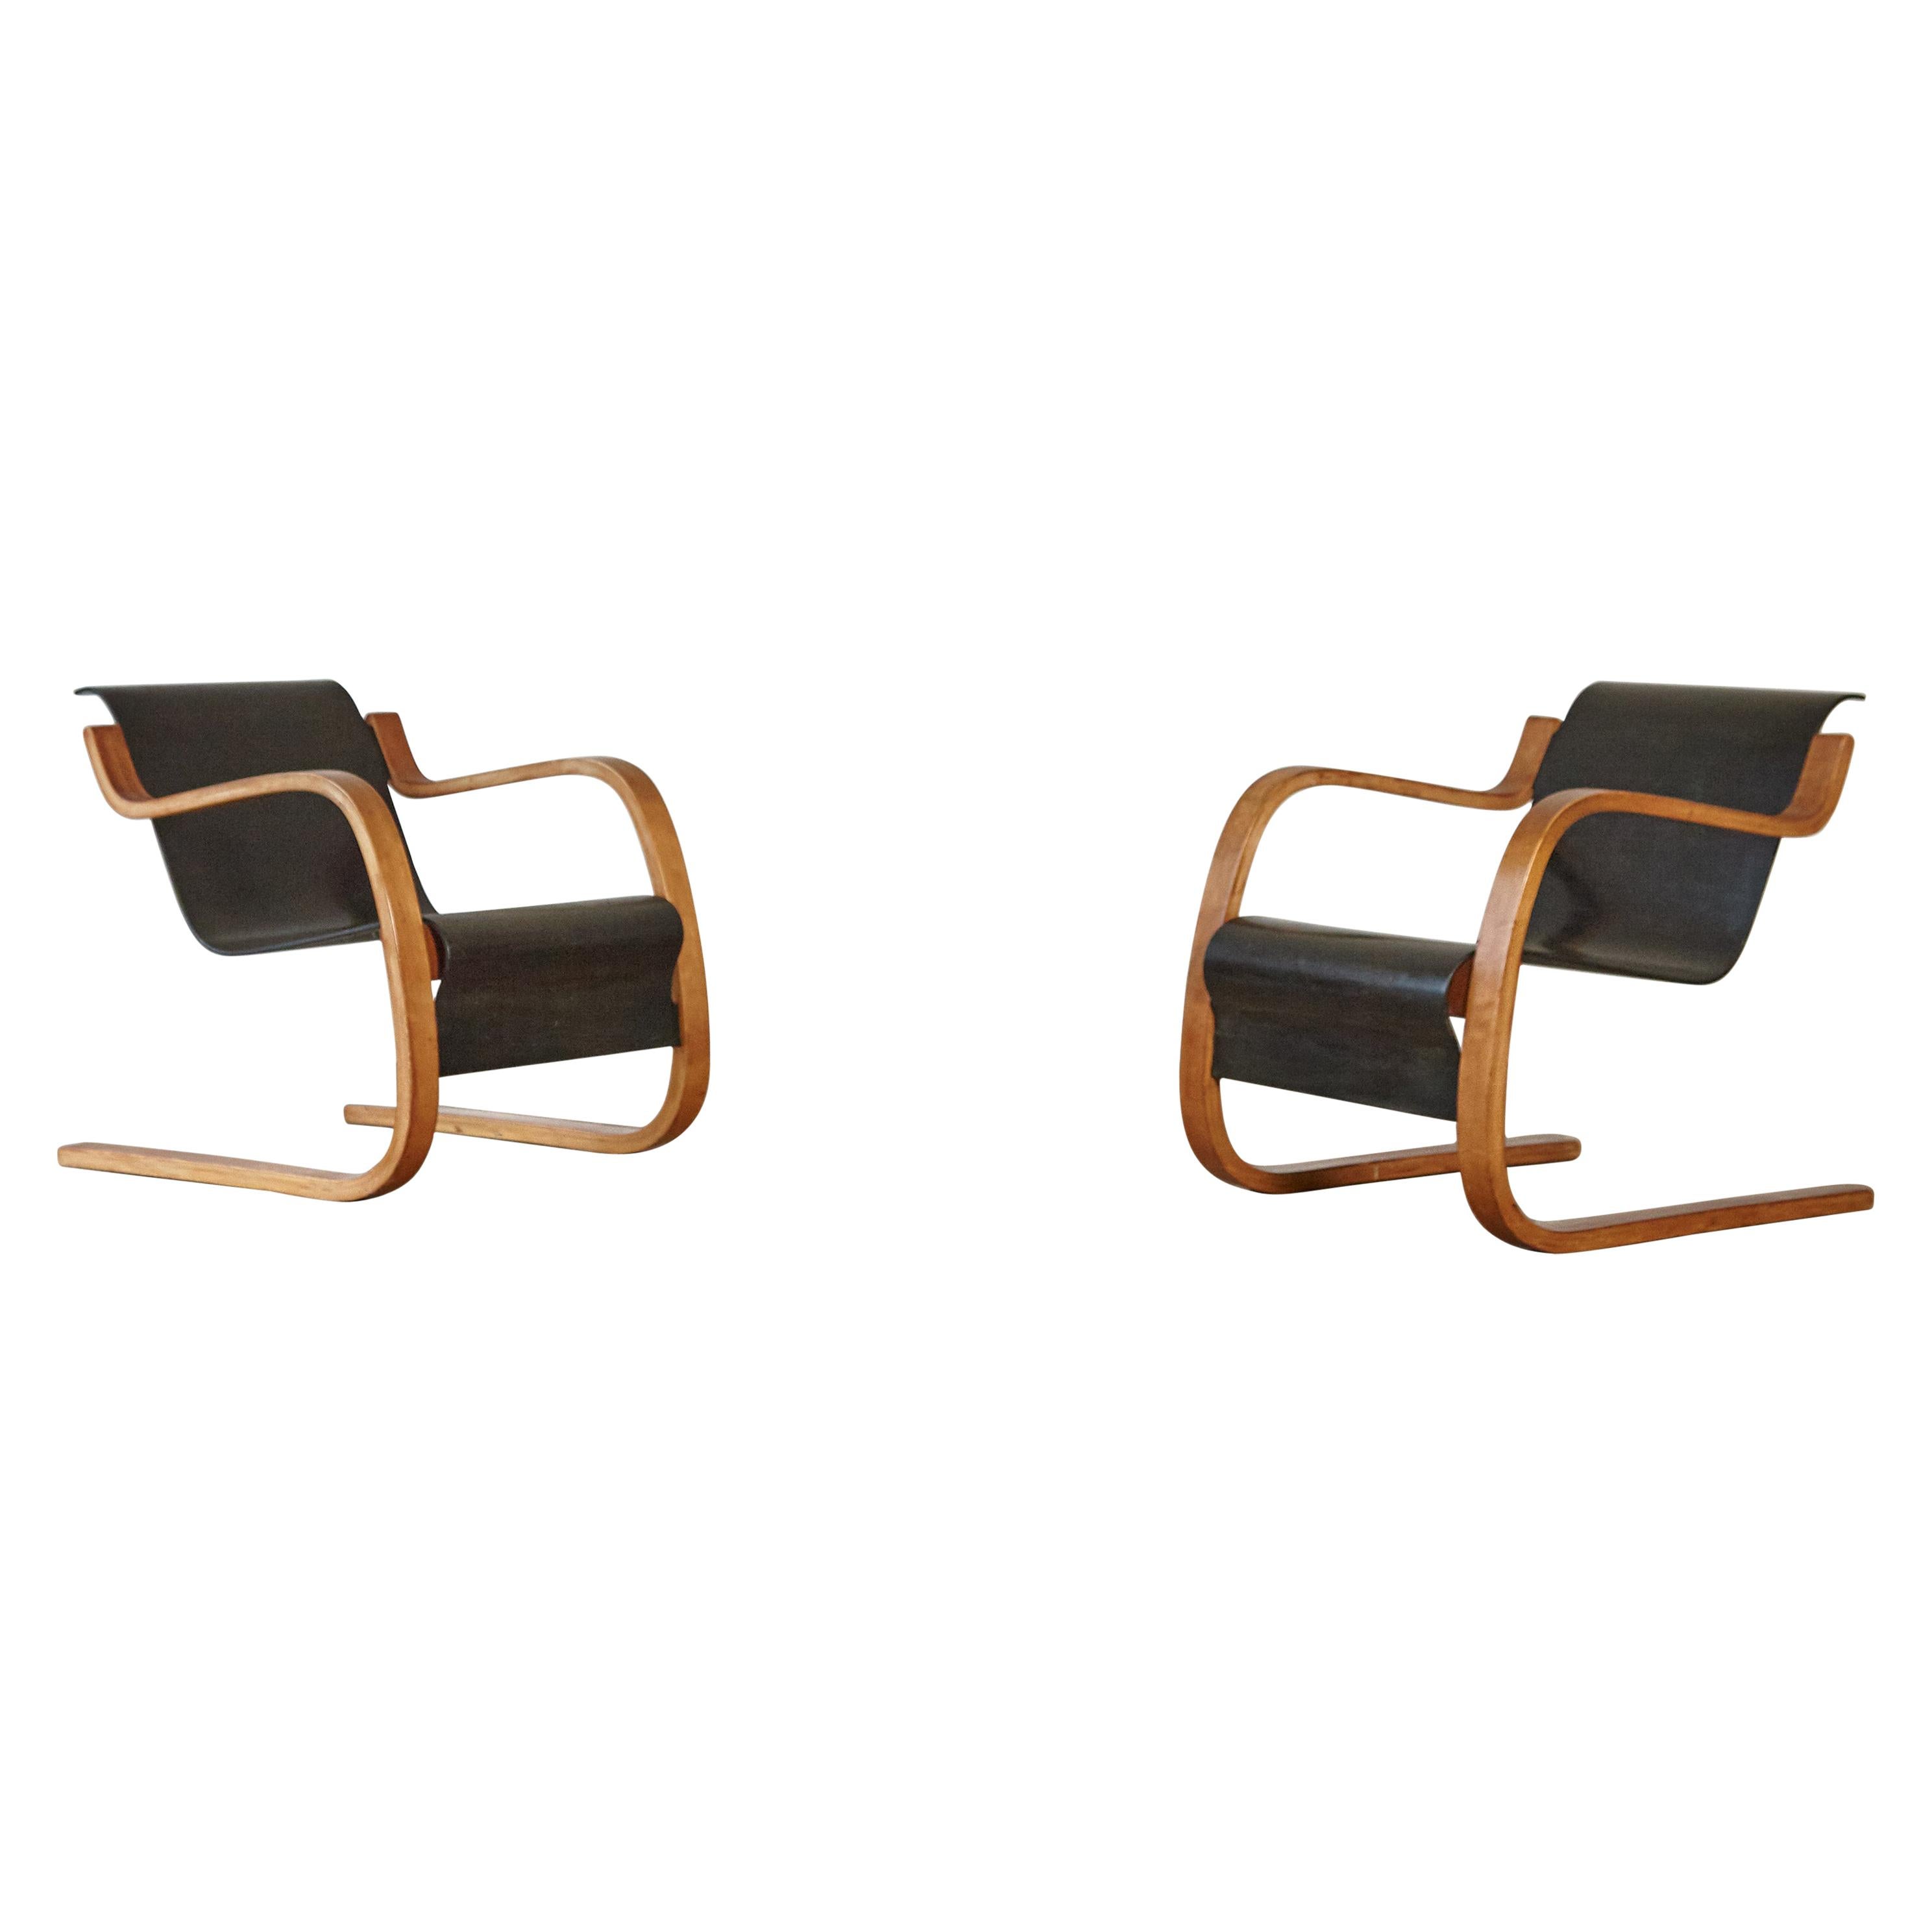 Rare, Early Alvar Aalto Model 31/42 Cantilevered Armchairs, Finland, 1930s